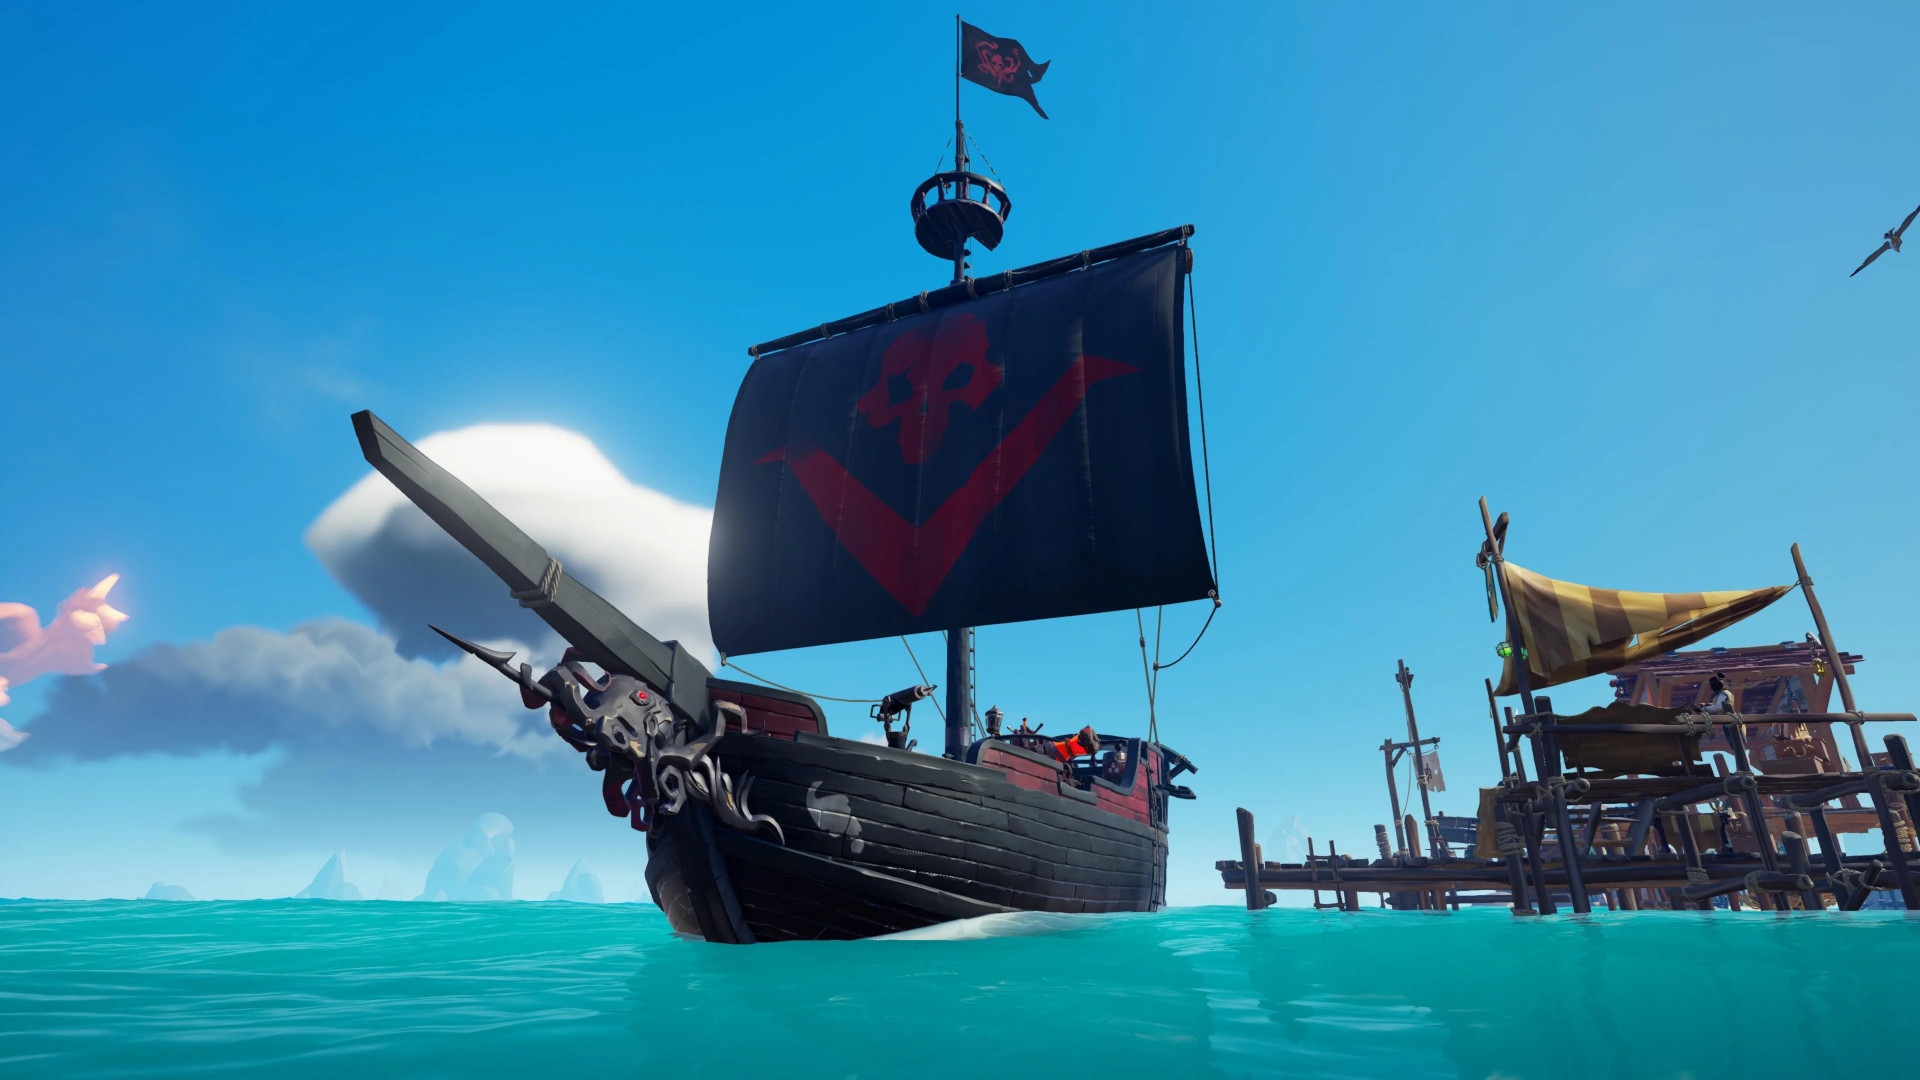 Sea of Thieves - Sails of the Bonny Belle DLC XBOX One / Windows 10 CD Key, 89.27$